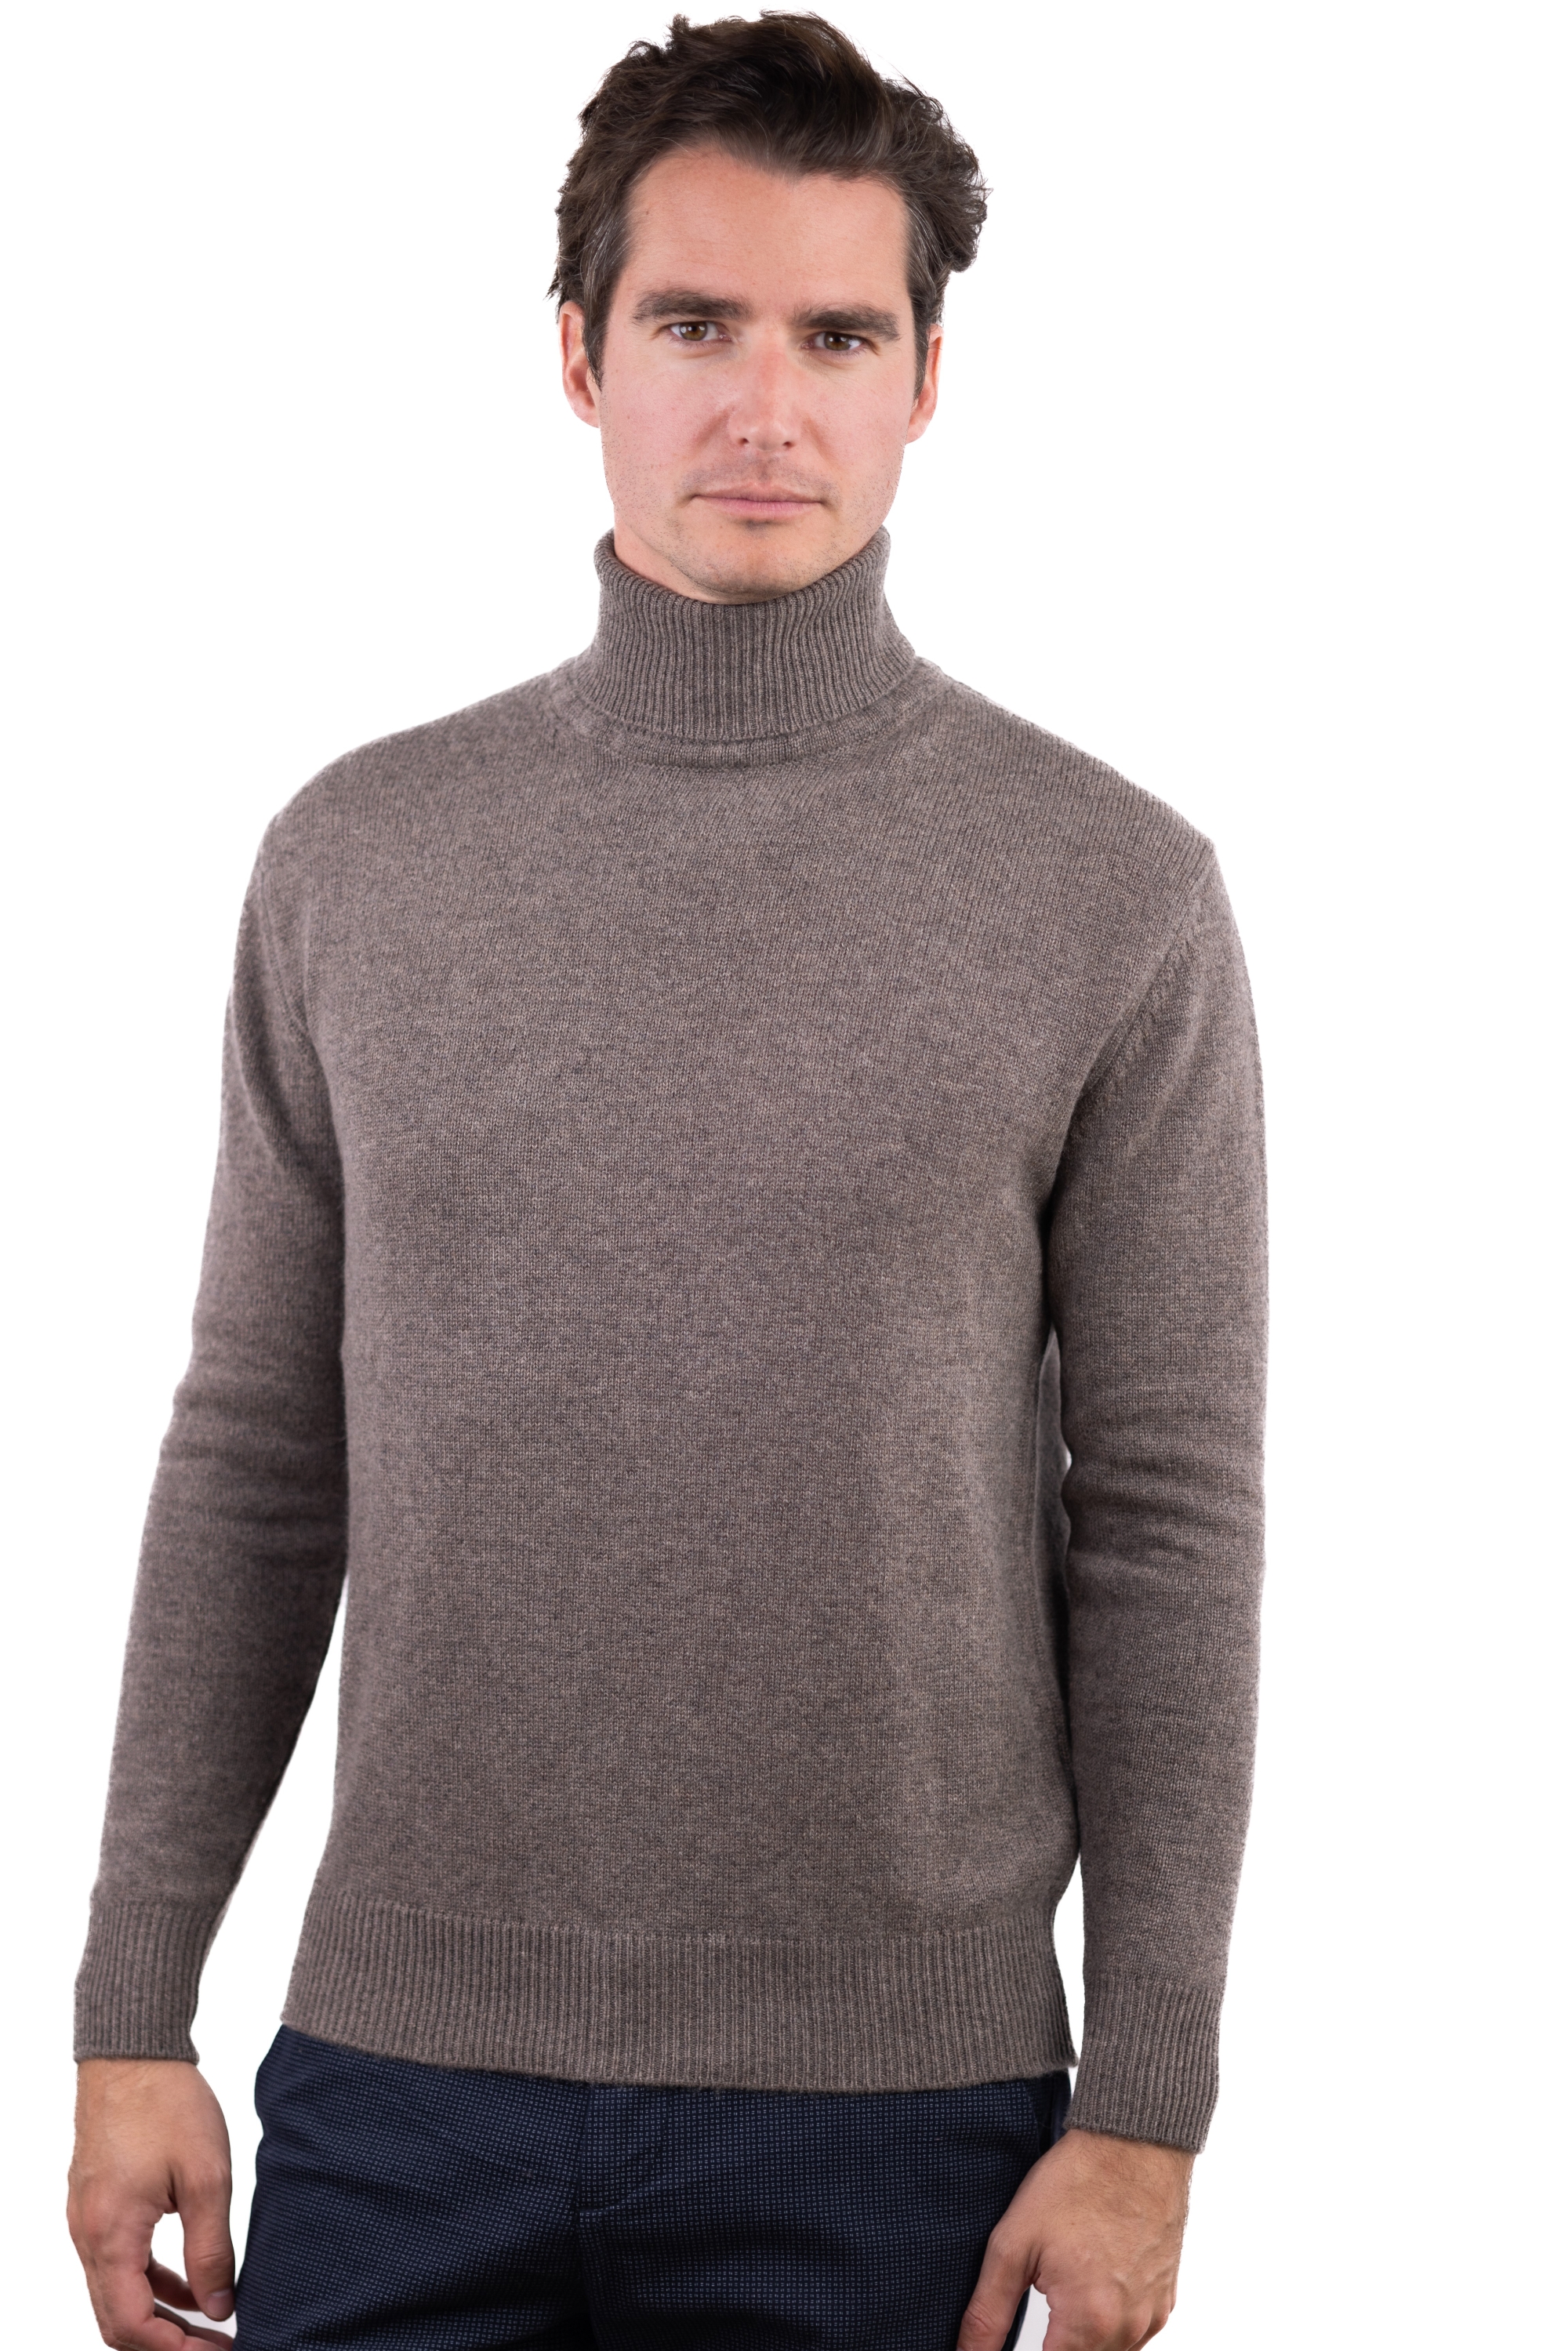 Cashmere men basic sweaters at low prices torino first otter m